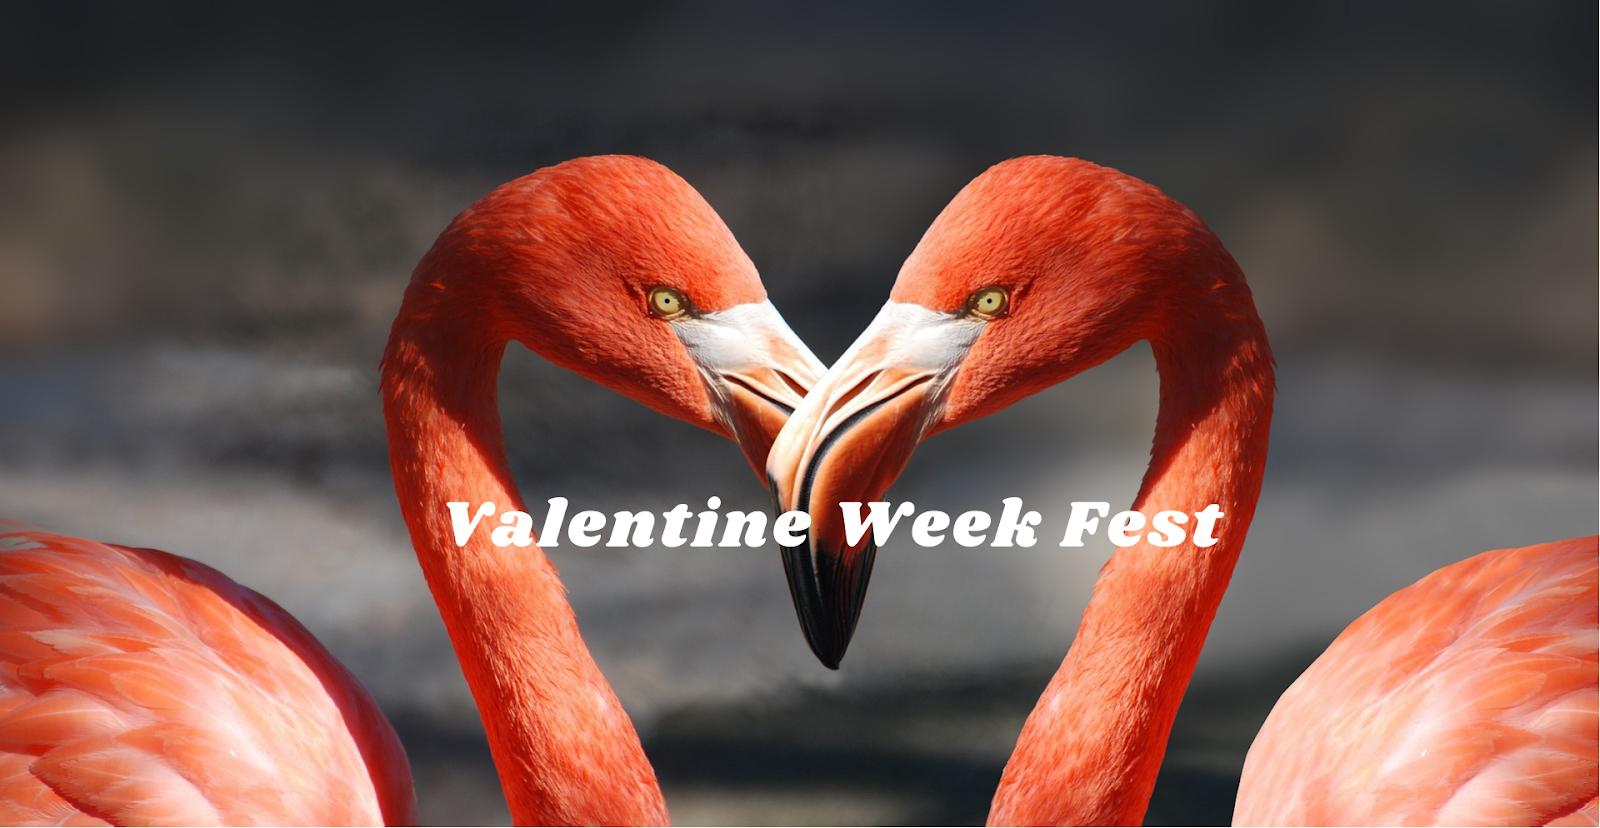 valentineweekfest-Wishes,Images,quotes & recipes